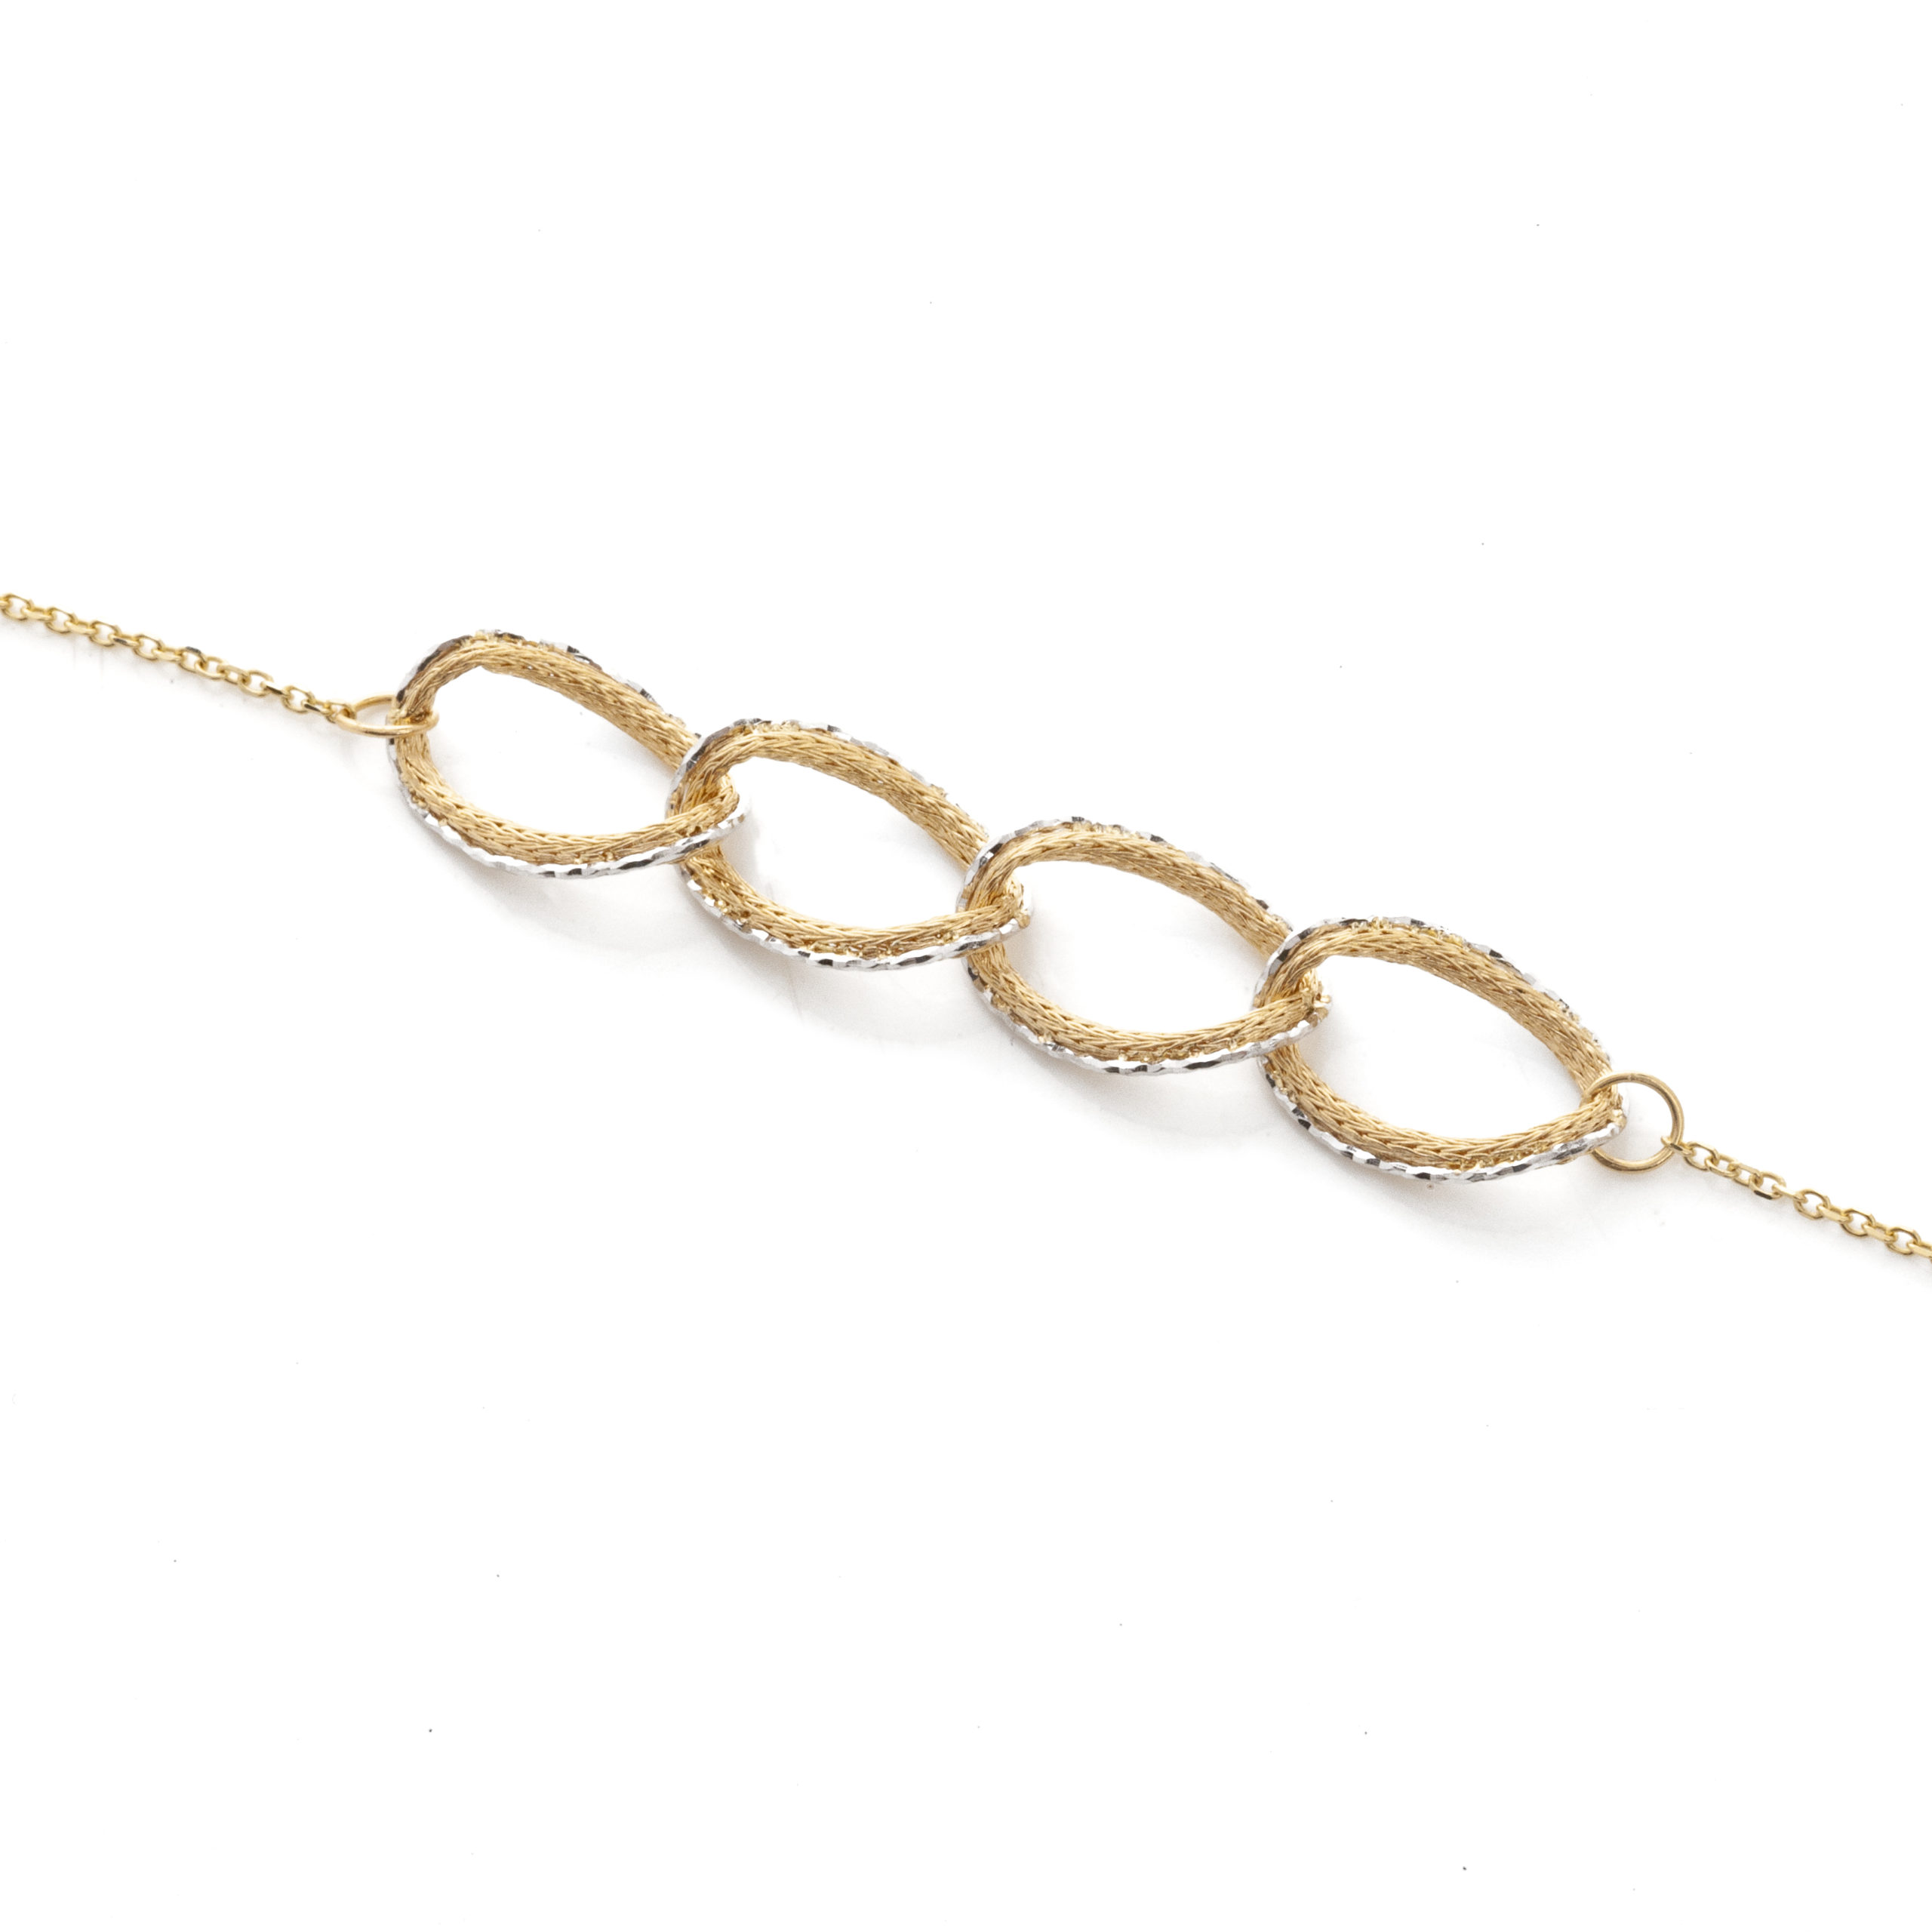 Gold Bracelet with Balls and Chain Links